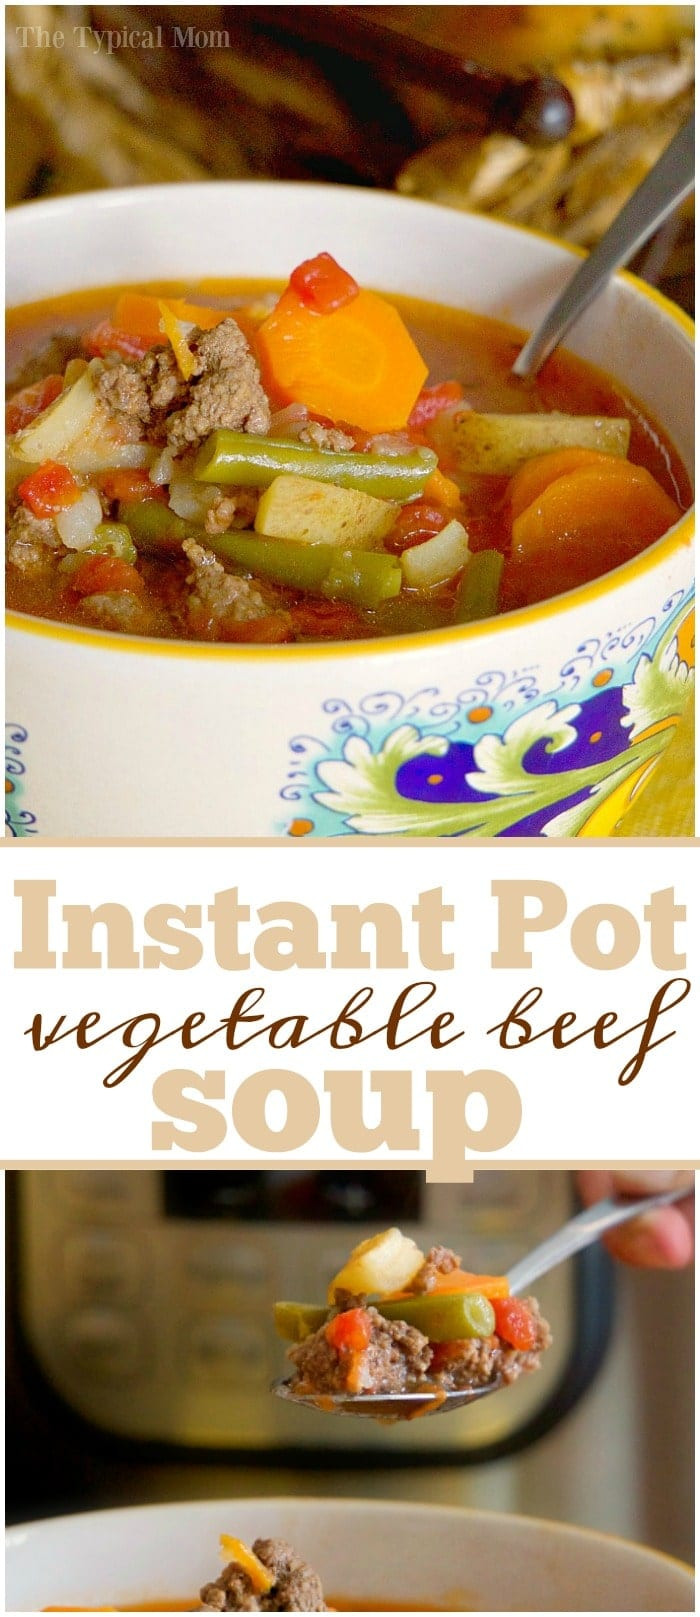 Vegetable Beef Soup Instant Pot
 Best Instant Pot Ve able Beef Soup Ground Beef or